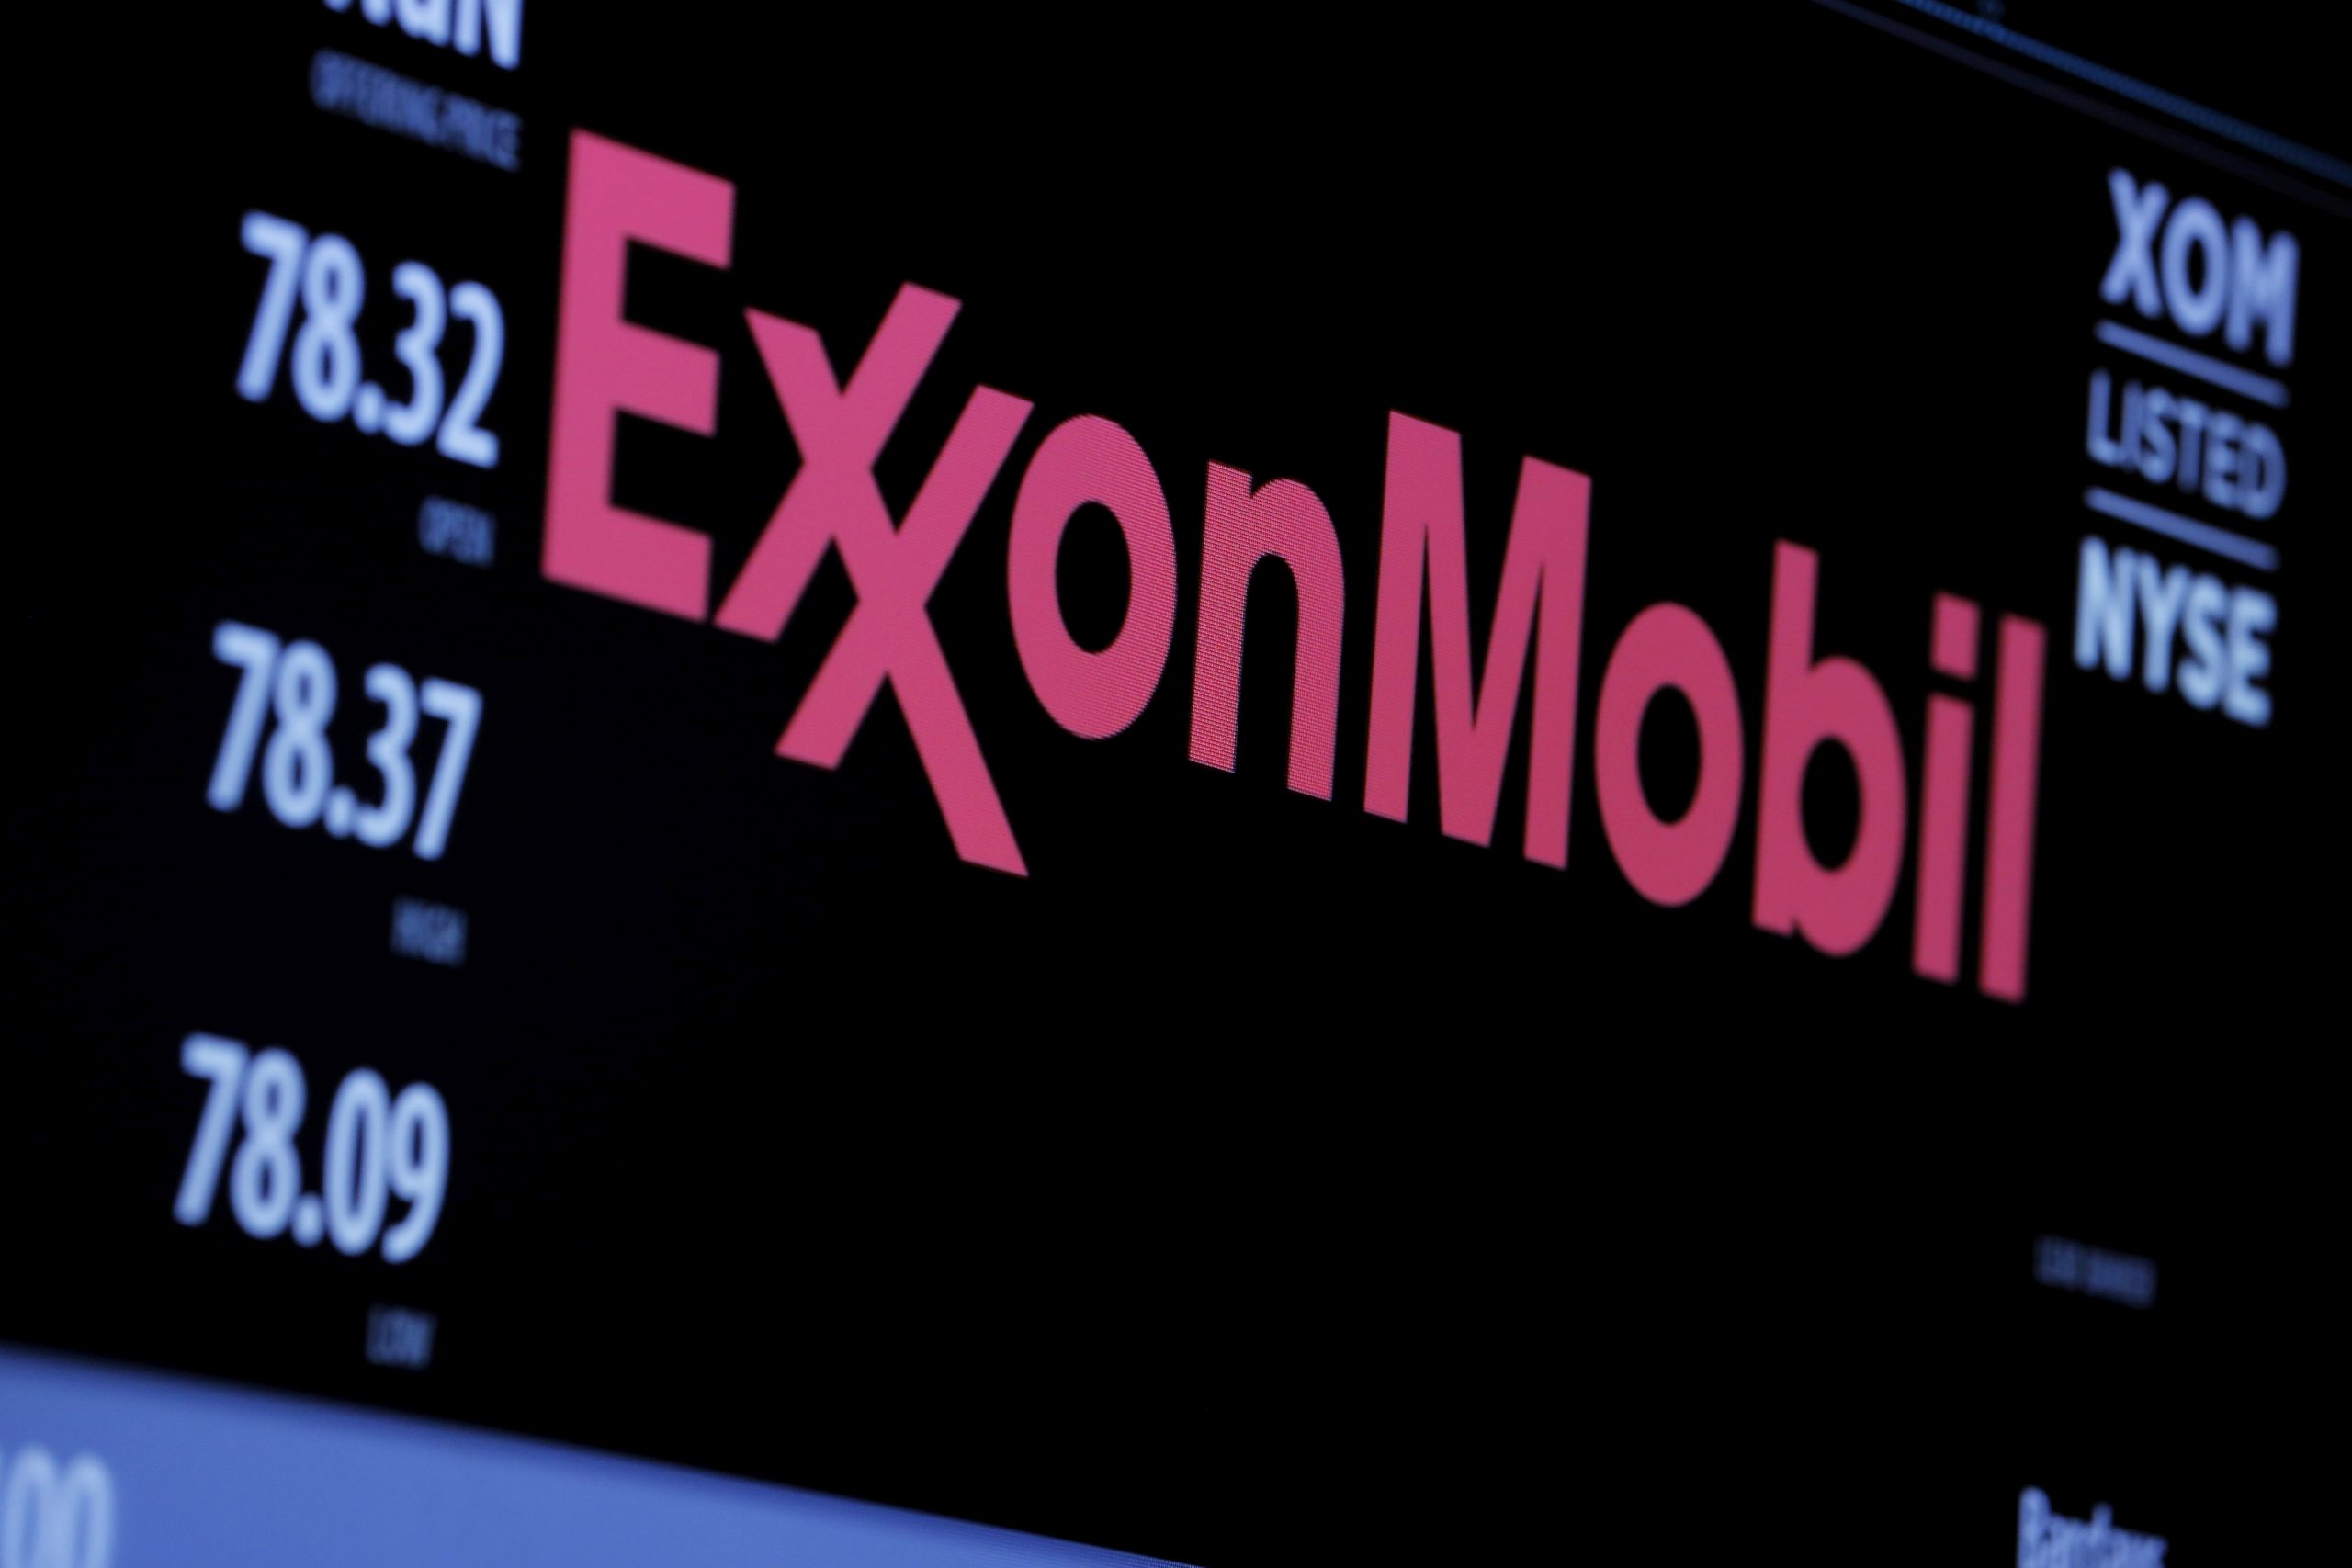  More departures from Exxon Mobil’s trading operation -sources